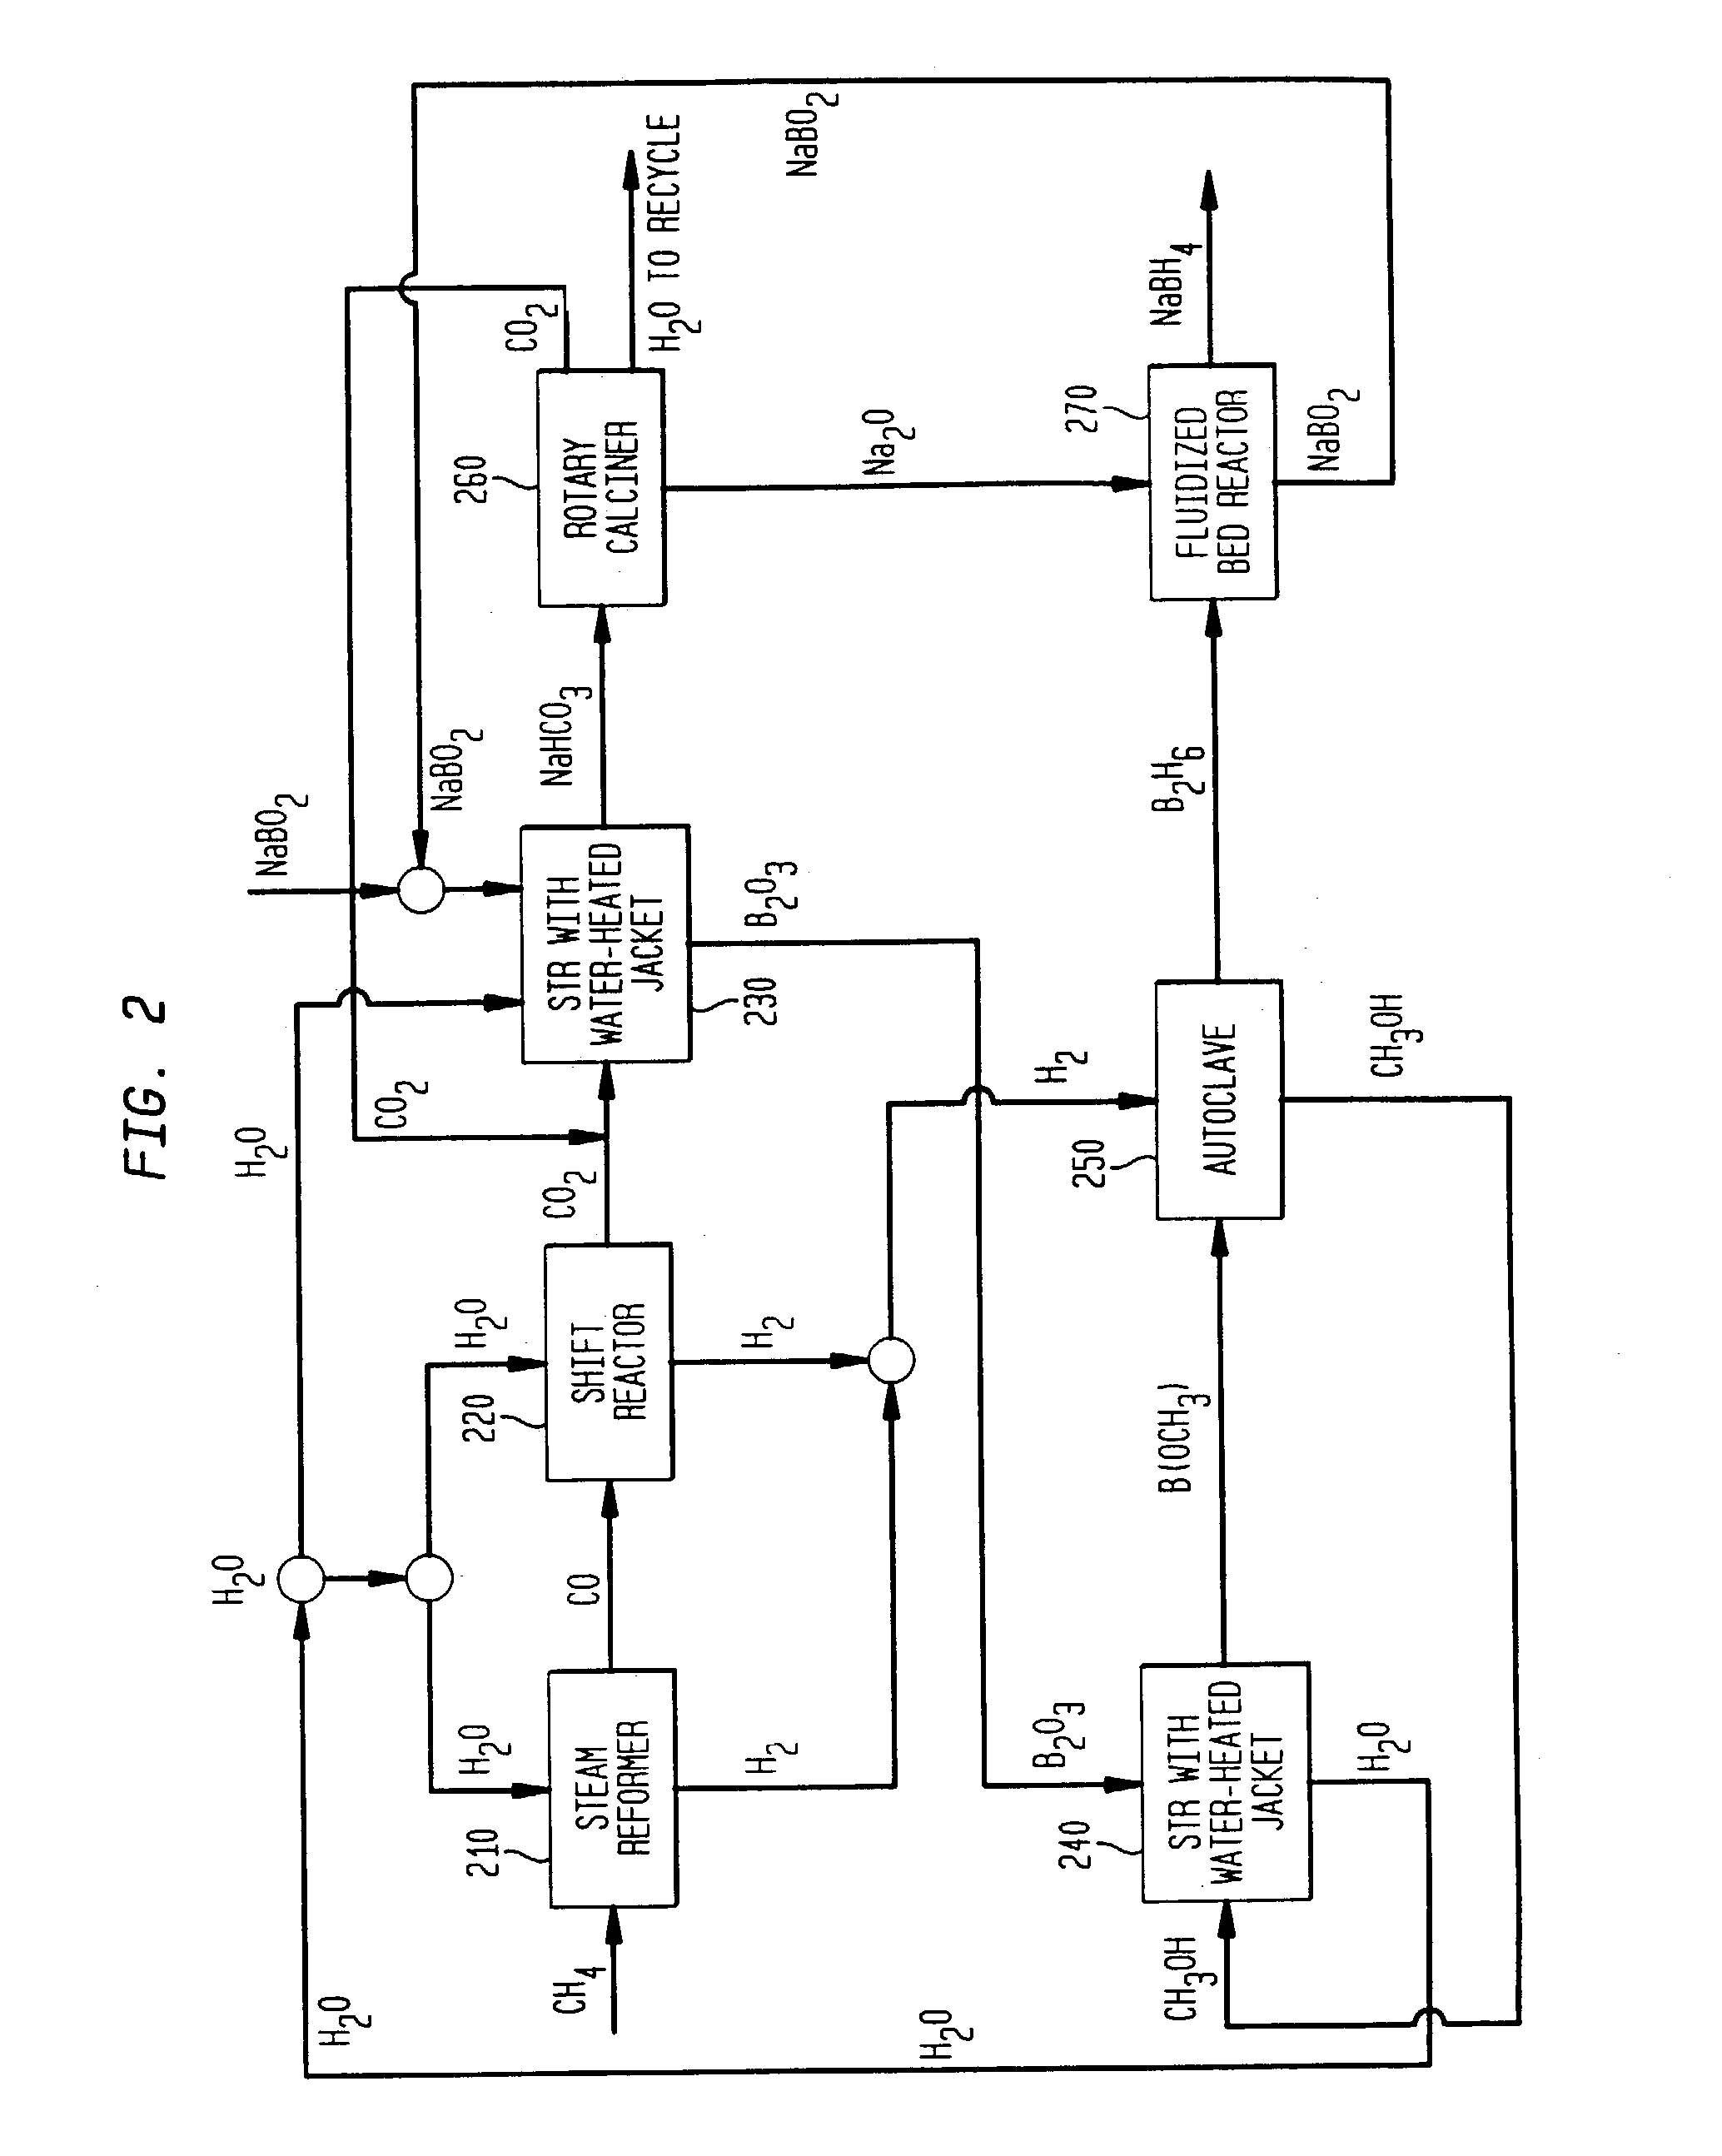 Processes for synthesizing borohydride compounds